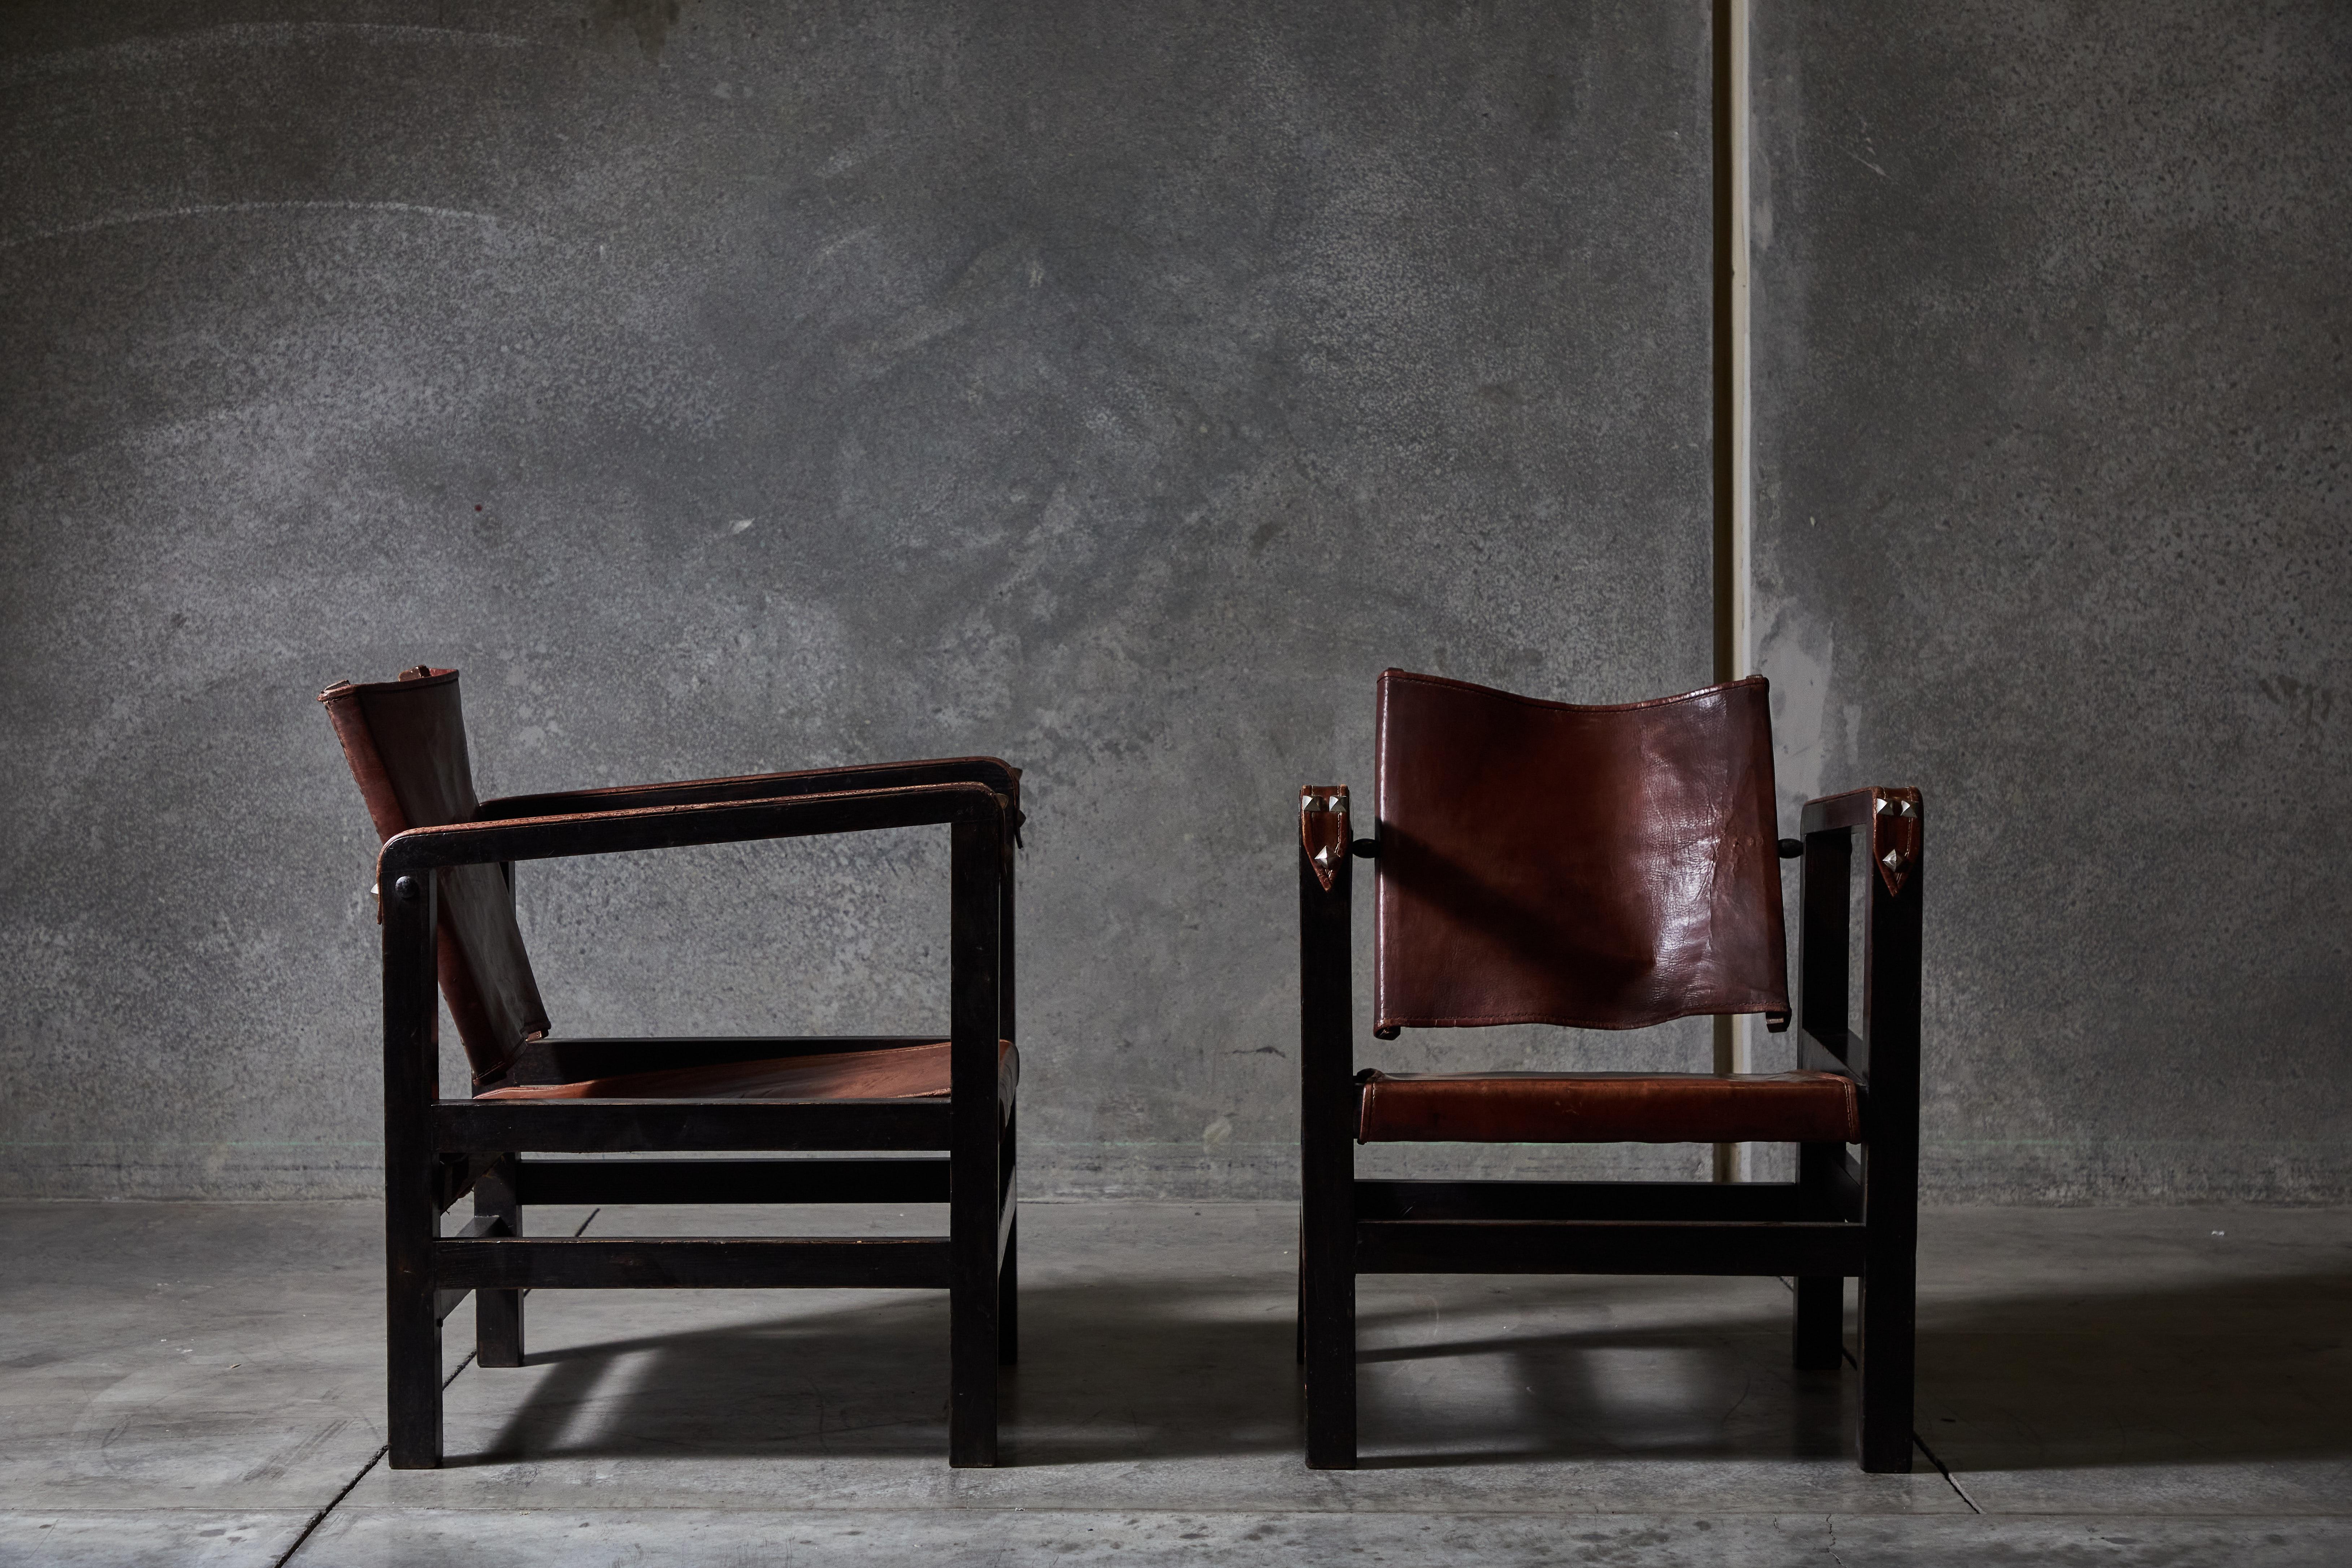 Rare pair of leather armchairs by Adolphe Chanaux for Chanaux & Co. Made in France, circa 1930s.

Chanaux & Co. impressed to wood frame.